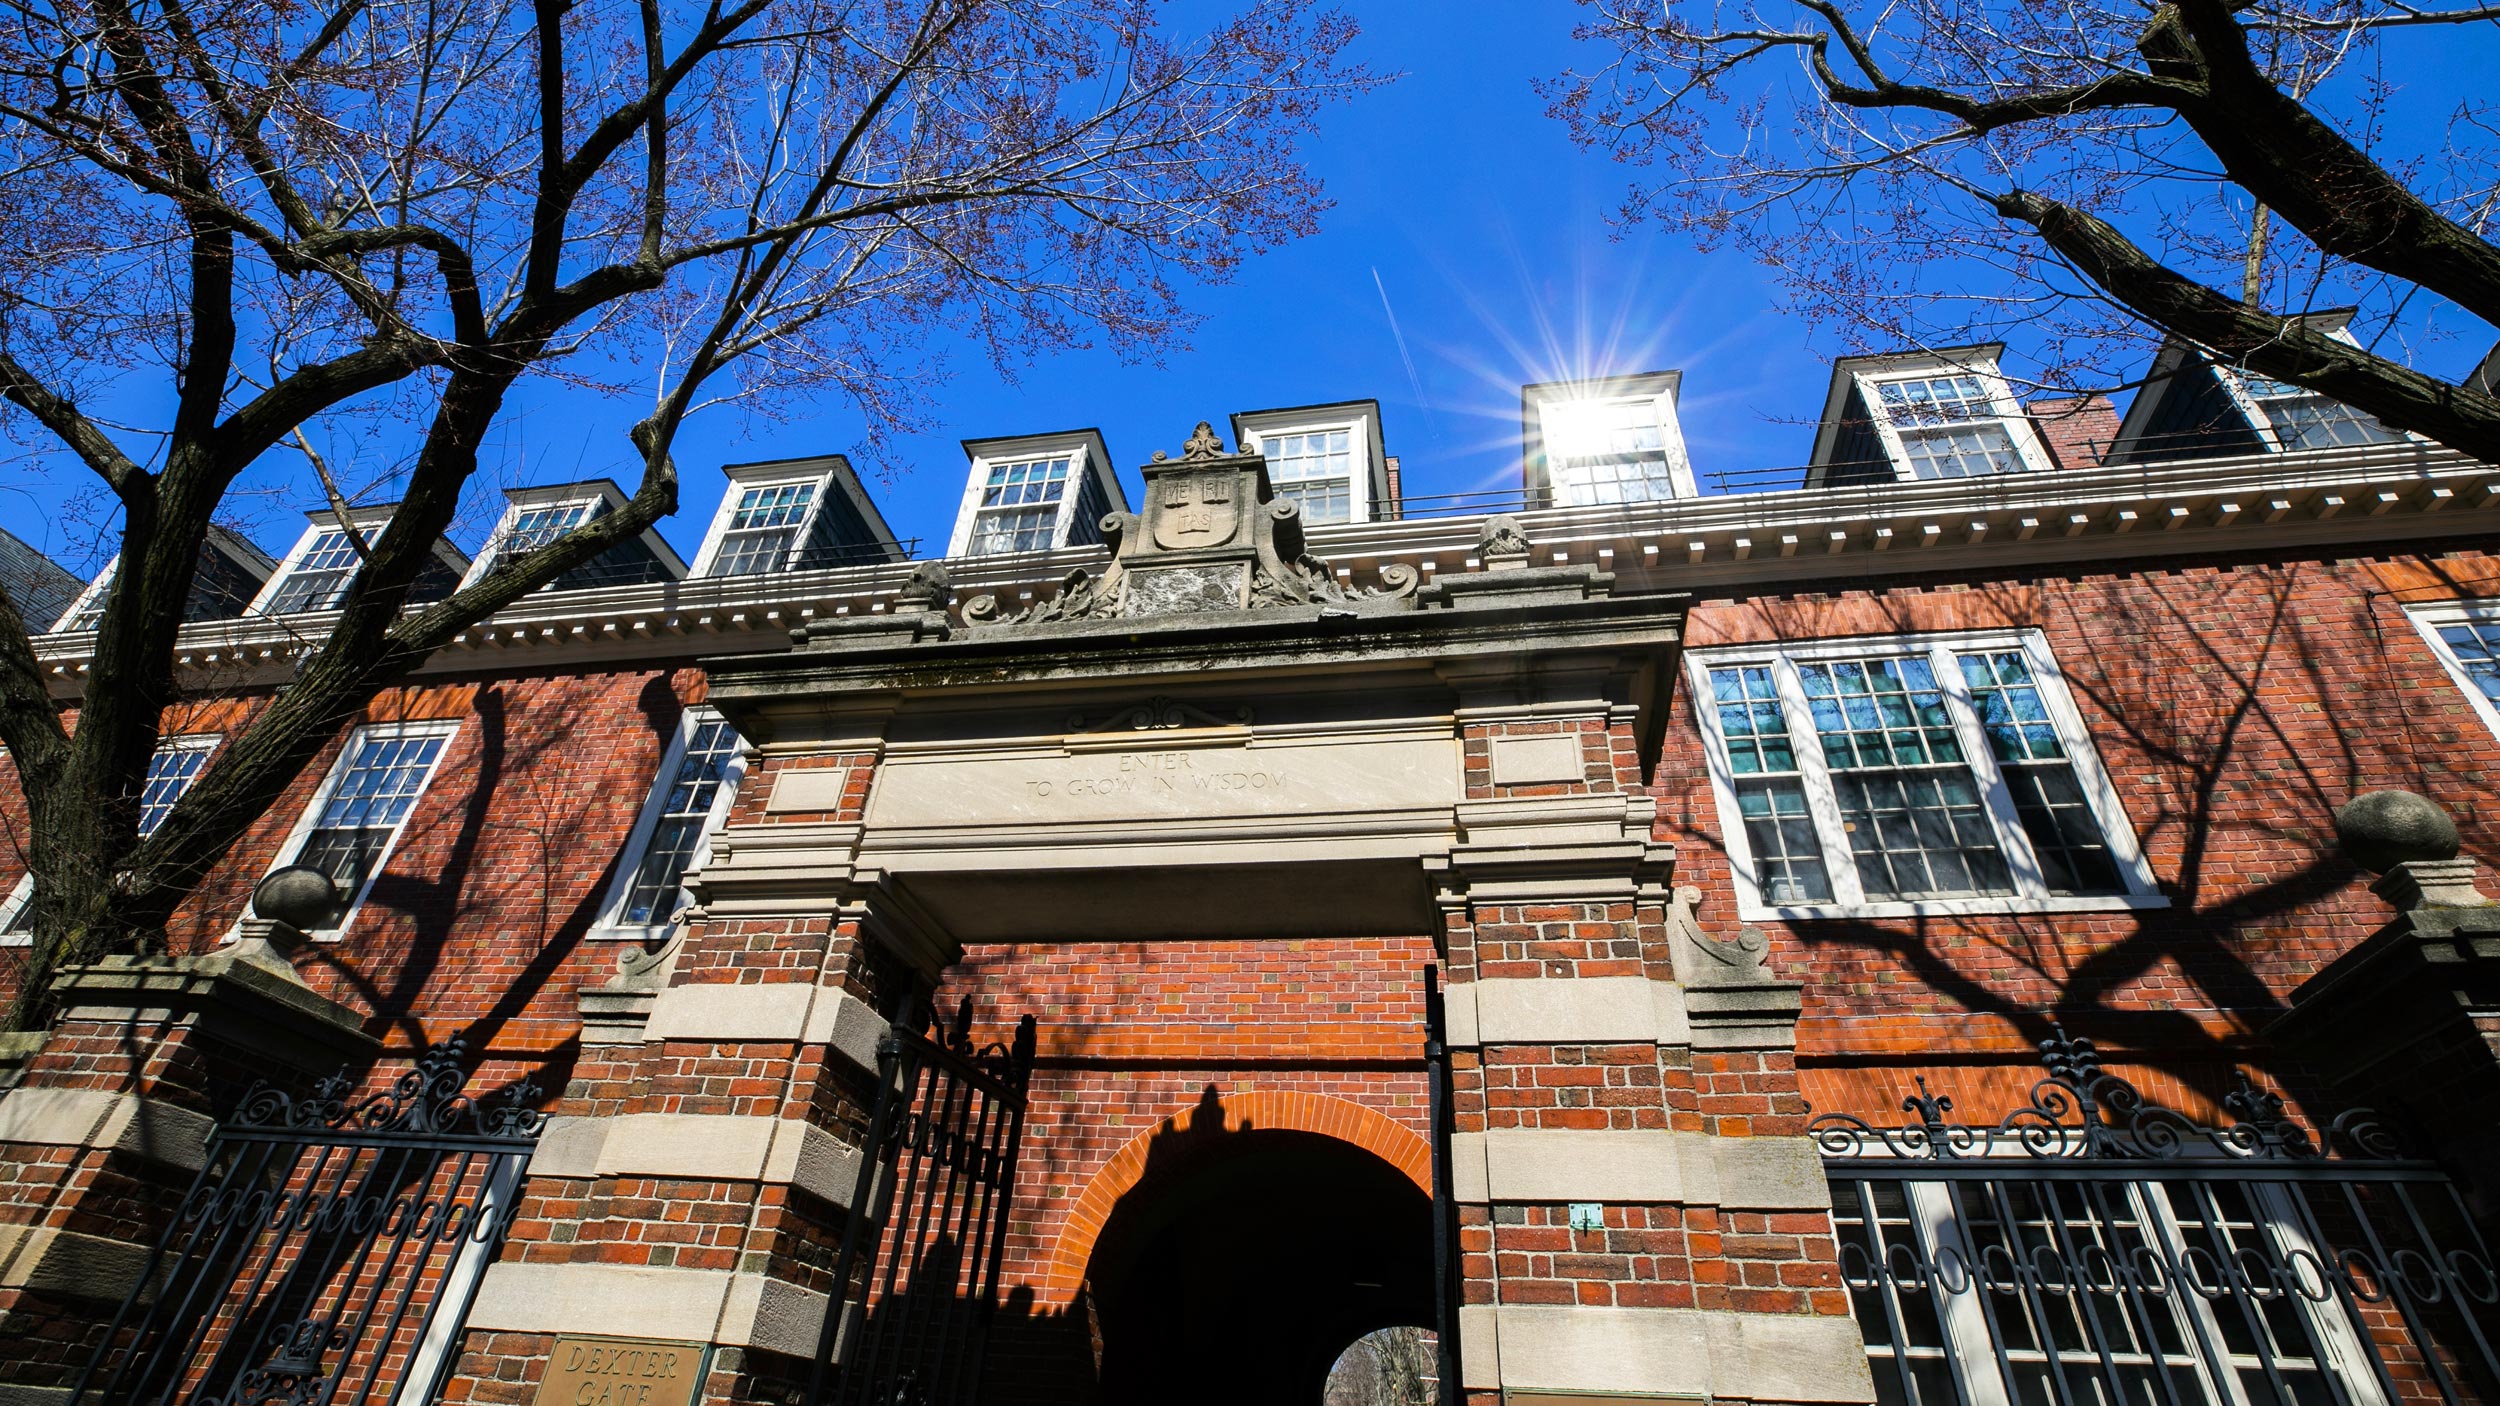 Dexter Gate greets visitors to Harvard Yard with the inscription: “Enter to grow in wisdom."